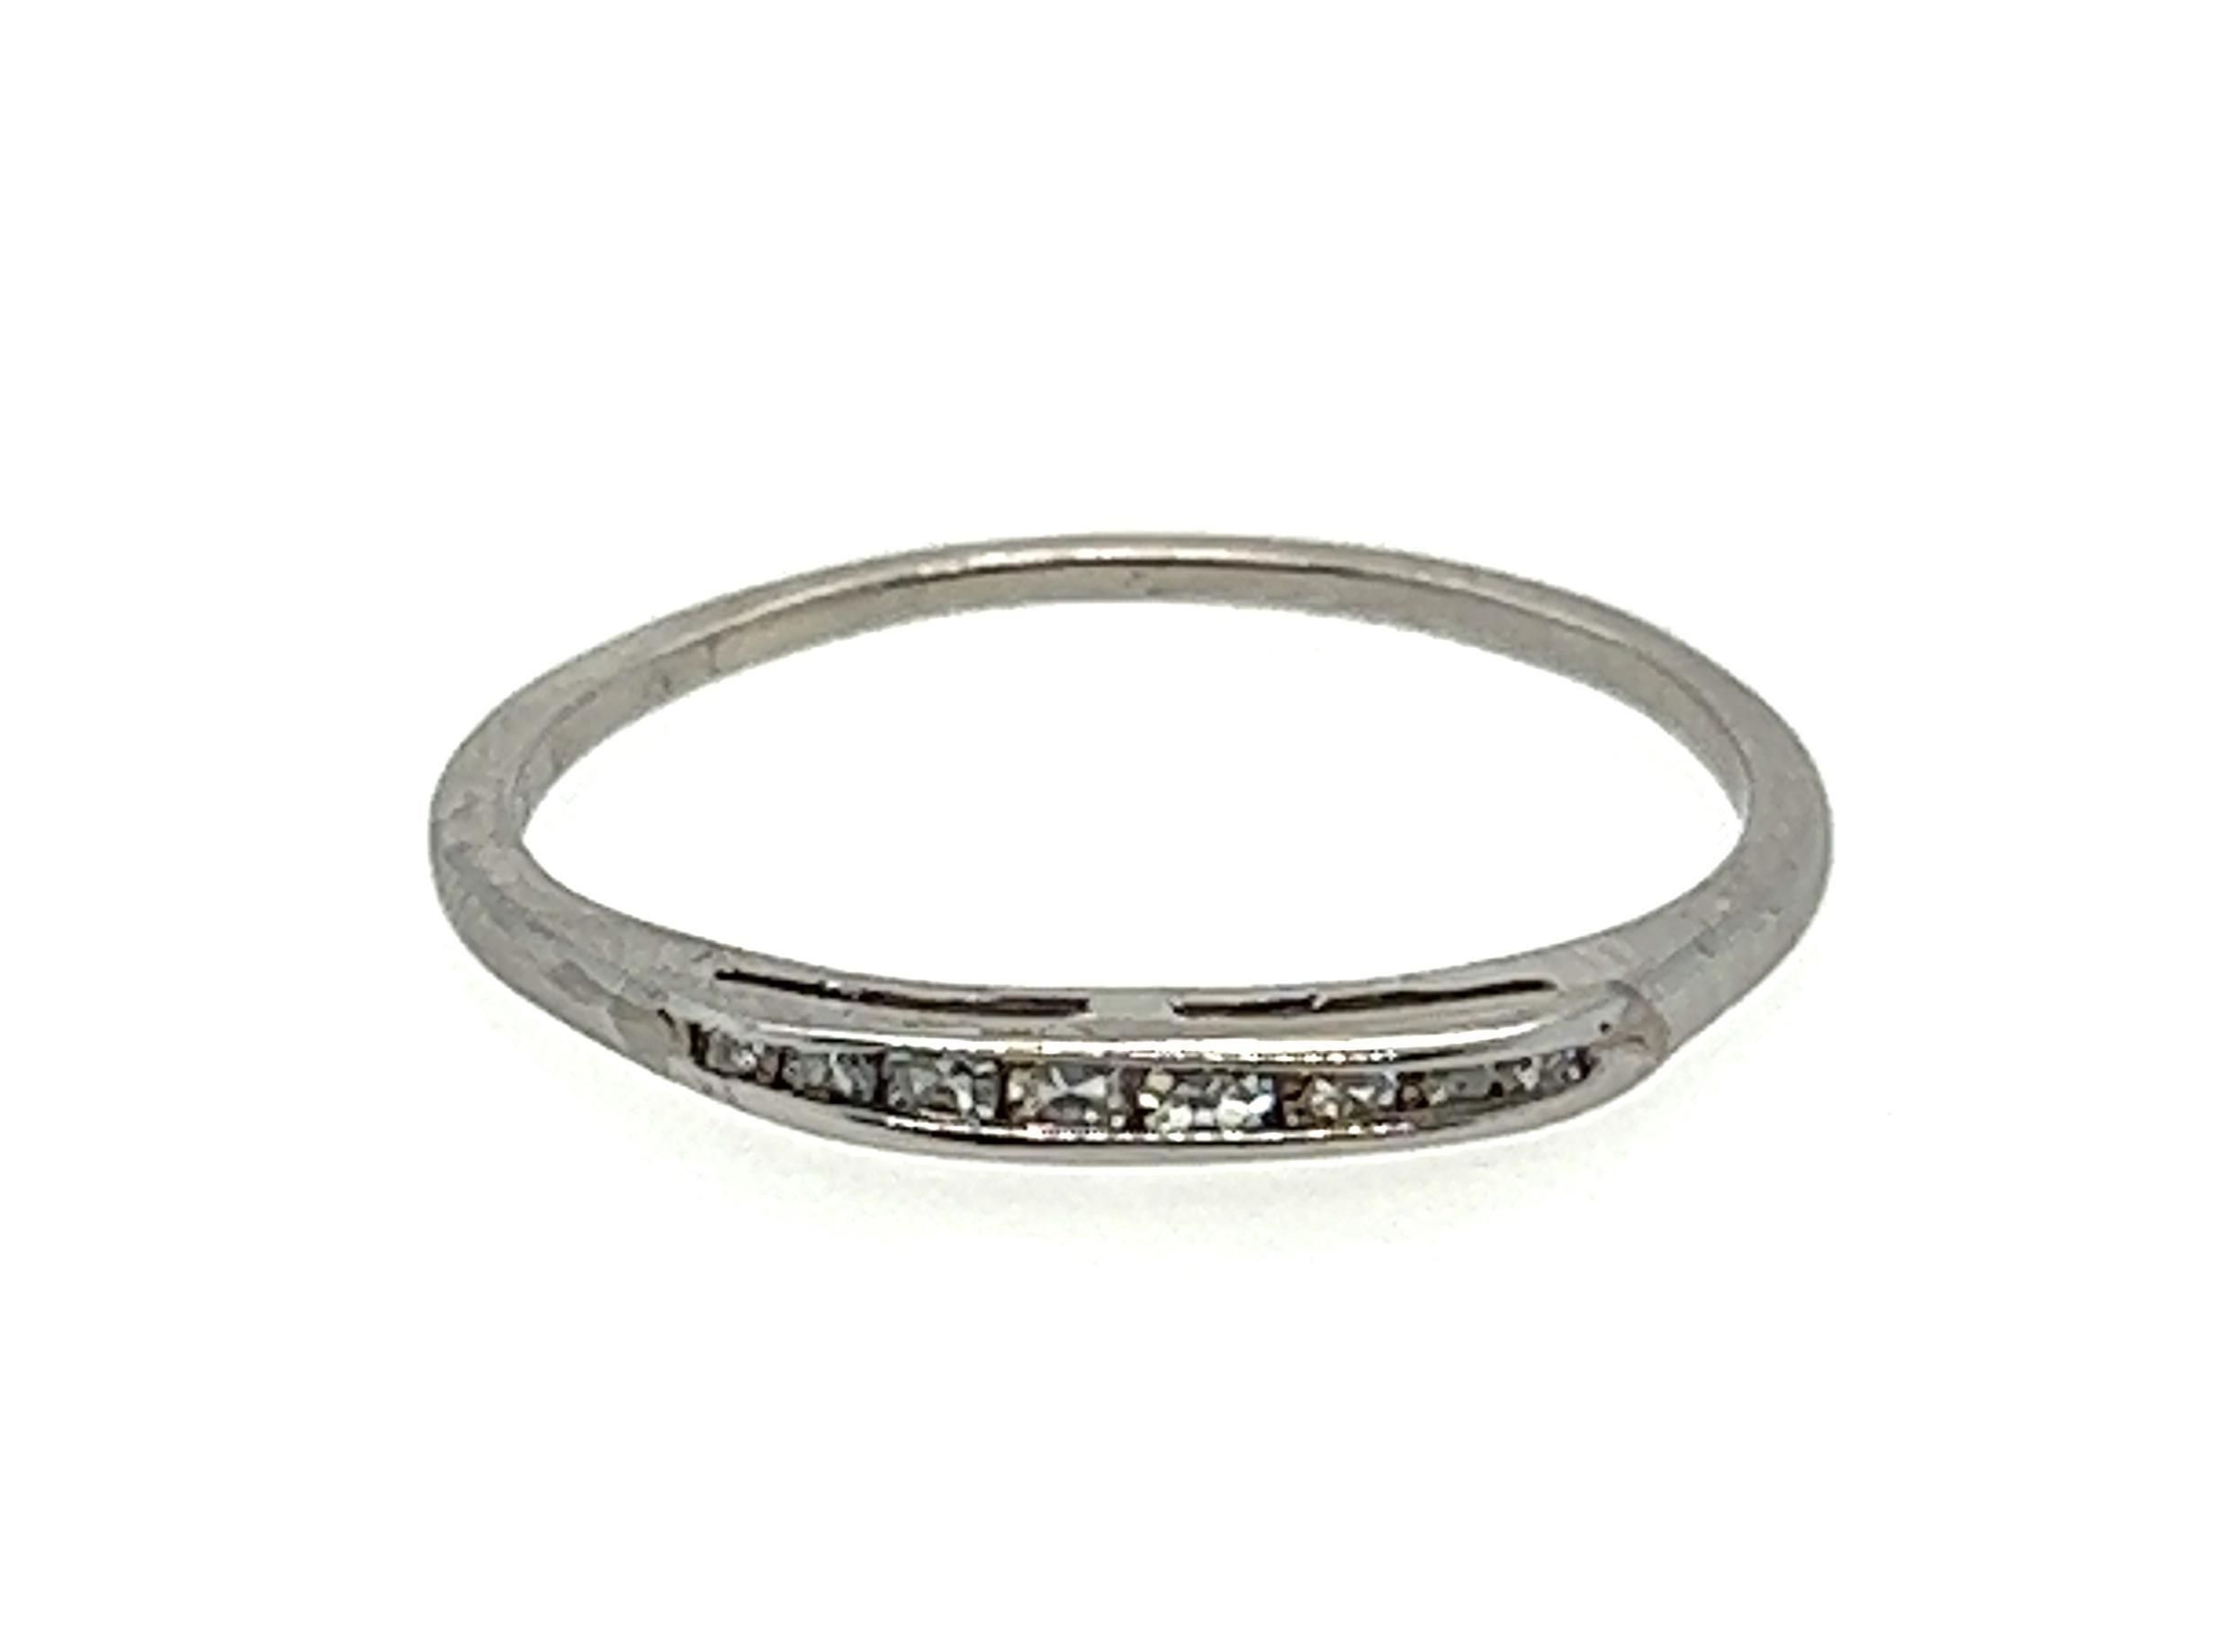 Genuine Original Art Deco Antique from 1930's Orange Blossom Diamond Wedding Ring Anniversary Band 18K White Gold 


Features Genuine Natural Mined F-G VS Antique Single Cut Diamonds Totaling .16ct

Stamped & Trademarked Orange Blossom Wedding